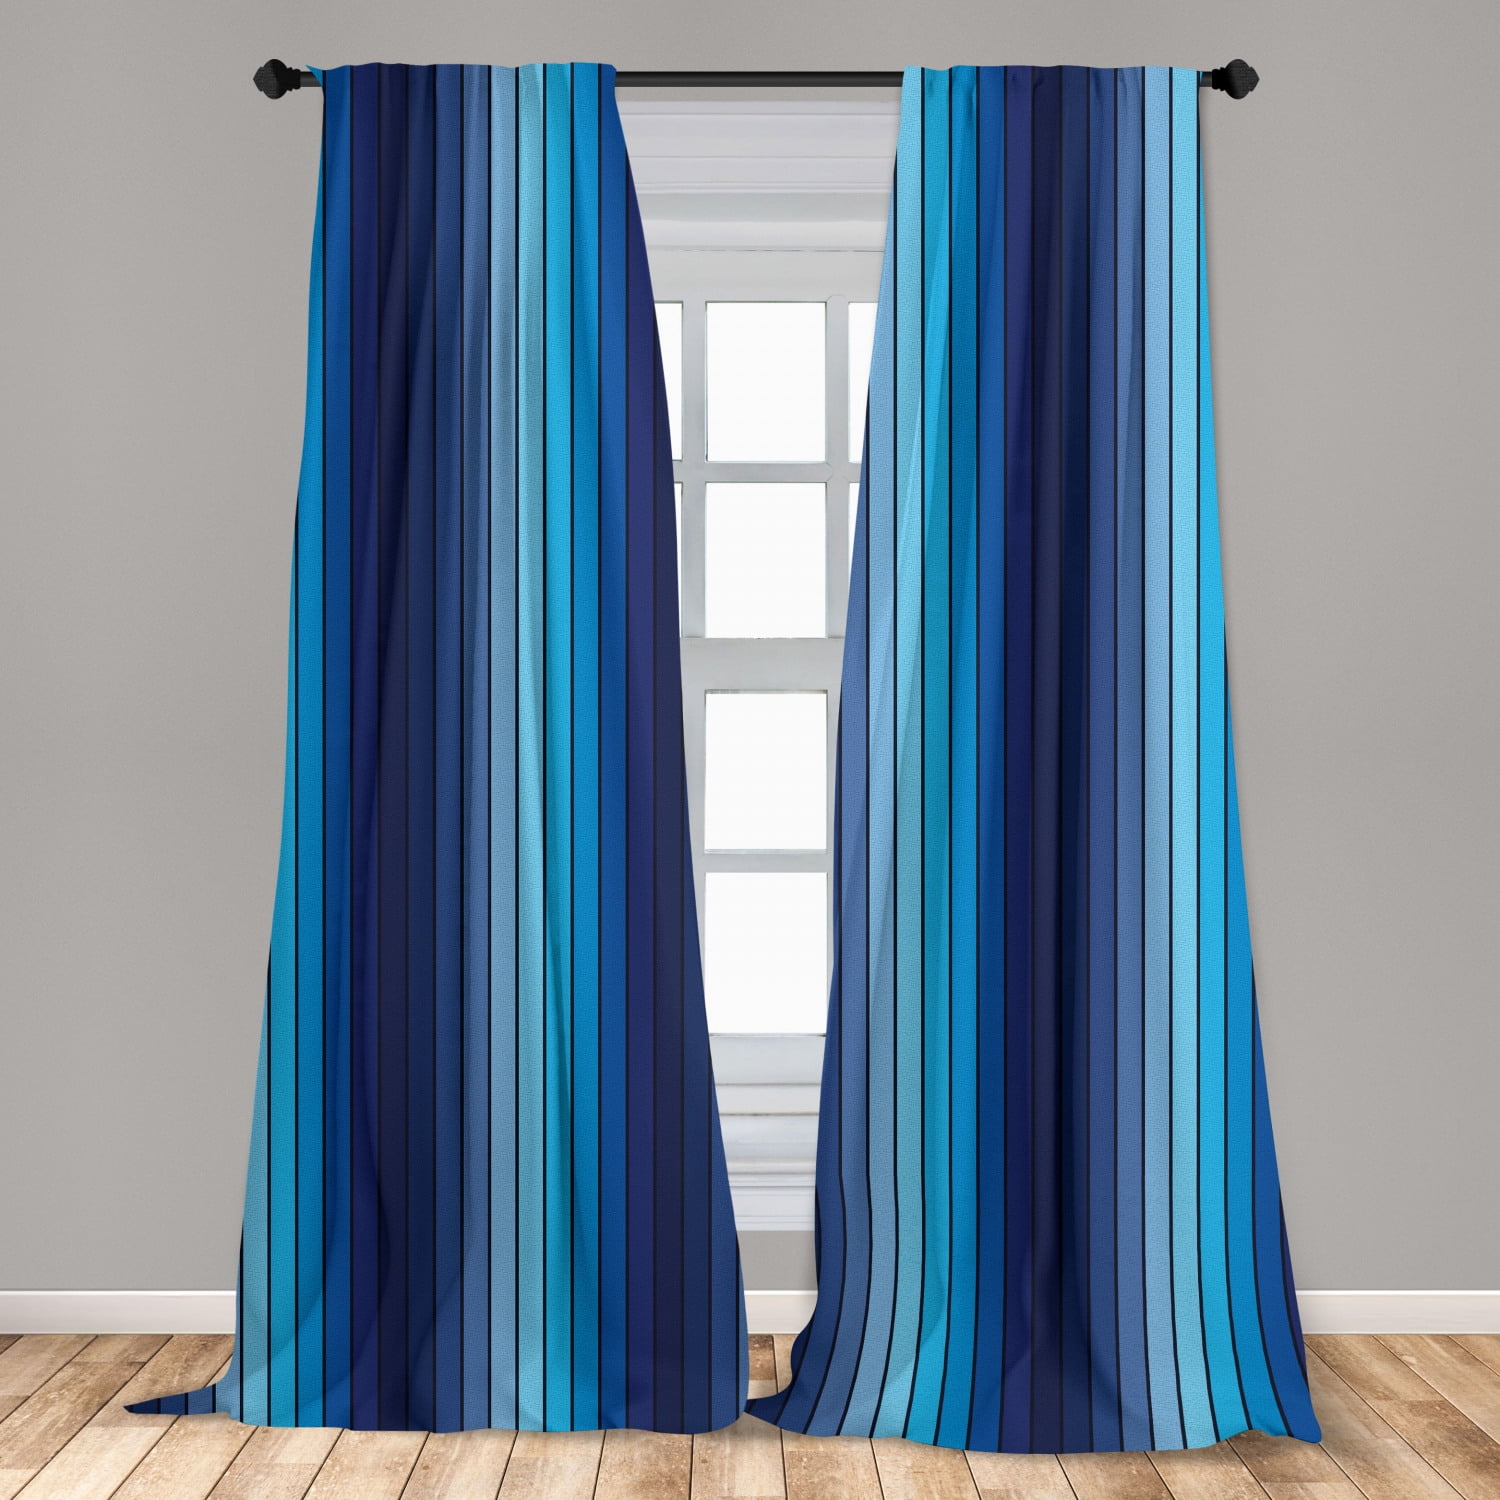 Navy Curtains 2 Panel Set Decor 5 Sizes Available Window Drapes Ambesonne 